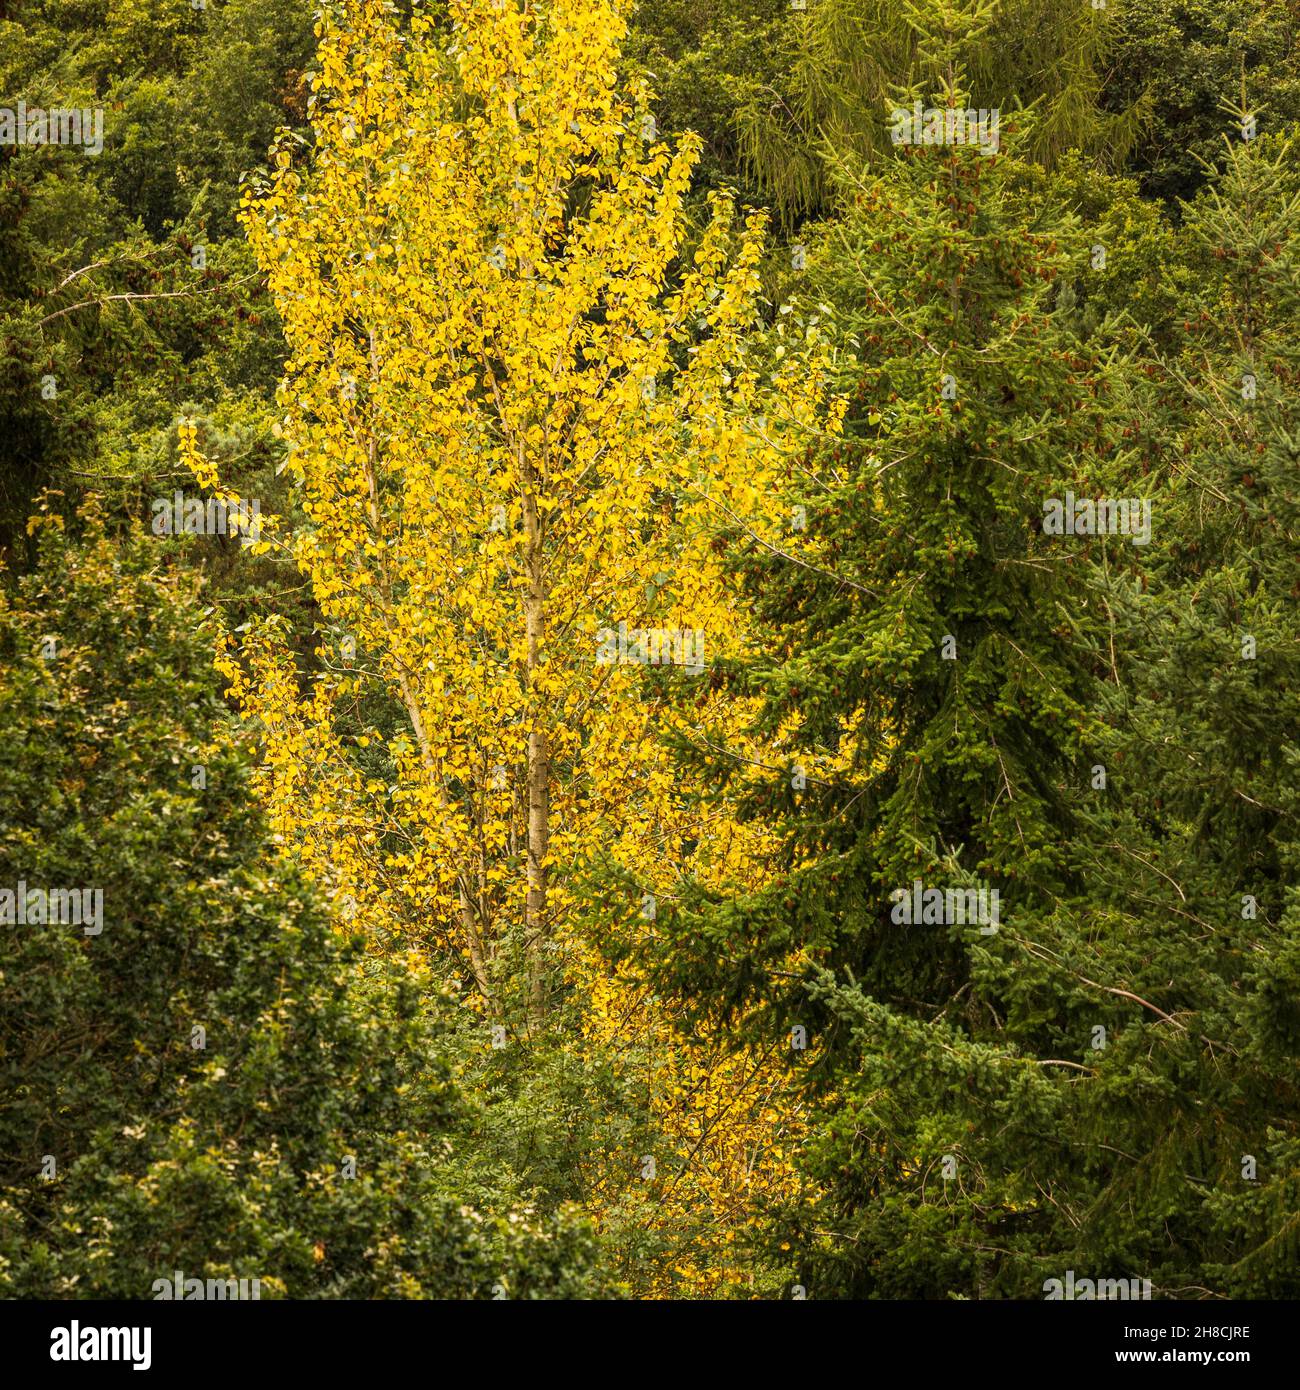 Populus tremula, aspen tree with vibrant yellow leaves at the start of autumn, Shropshire Hills area of natural beauty, England Stock Photo